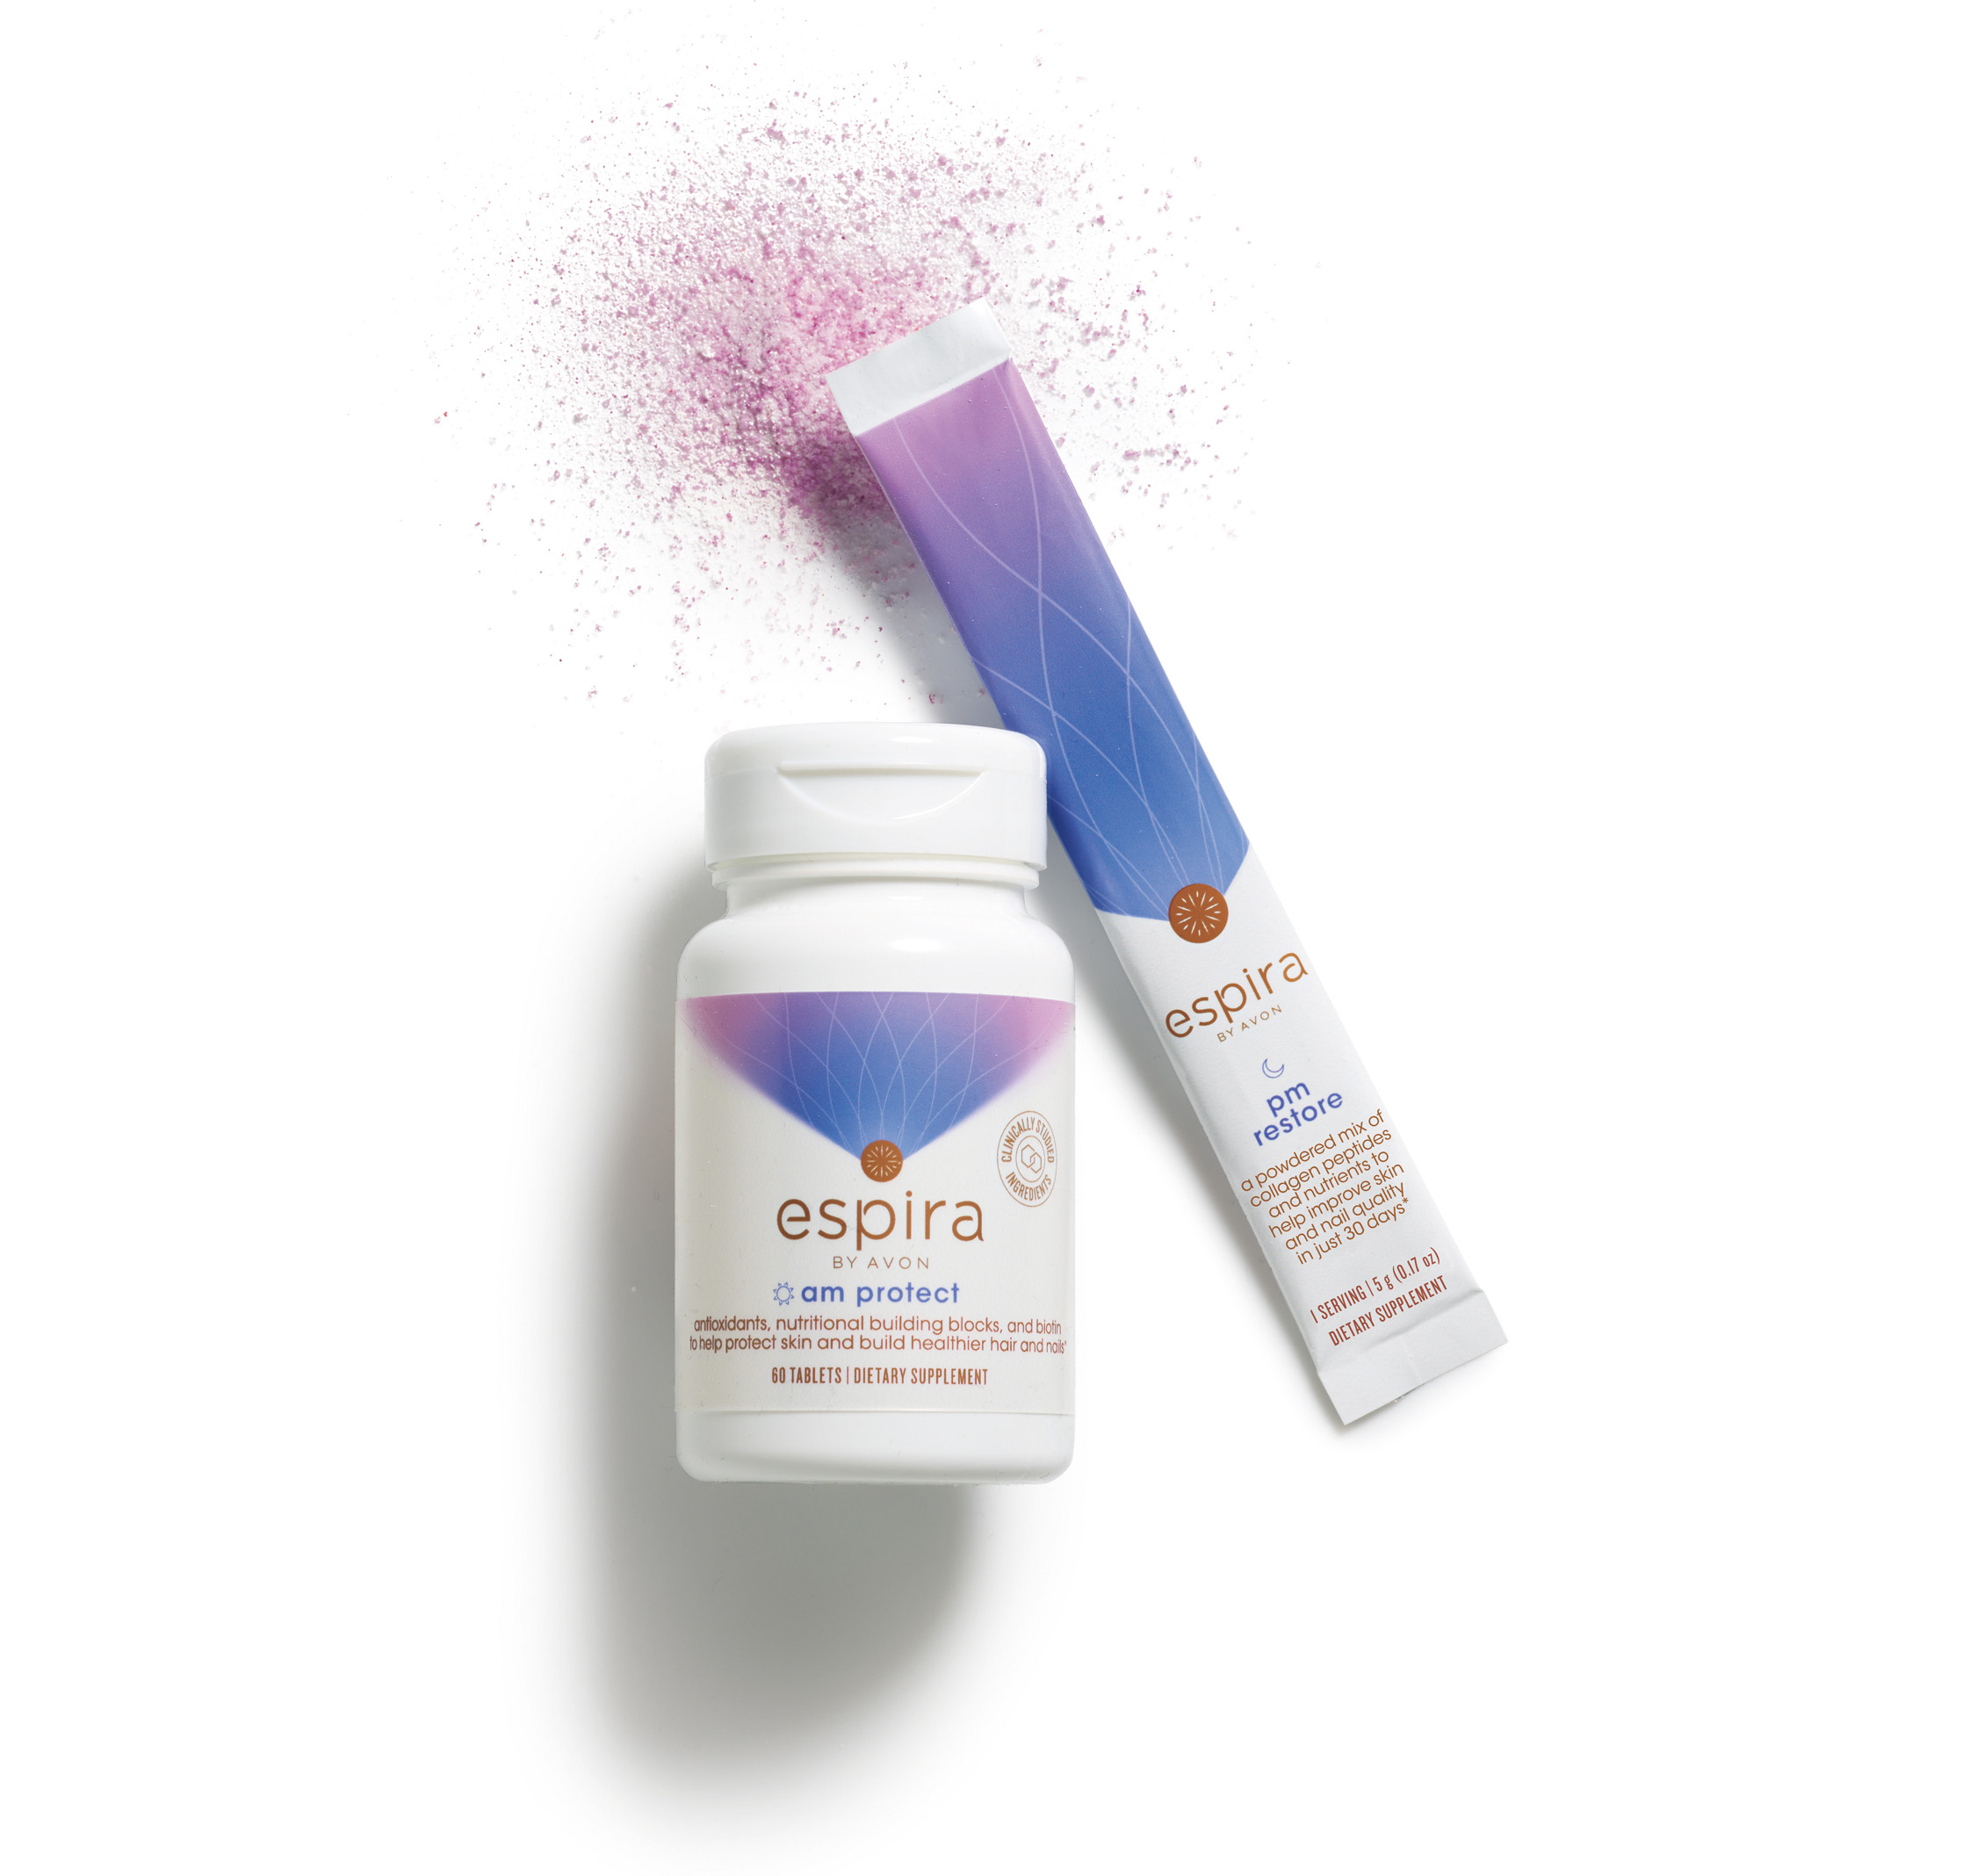 Espira By Avon AM Protect and PM Restore supplements provide antioxidents and nutritional bulding blocks for stronger, healthier-looking hair, skin and nails.